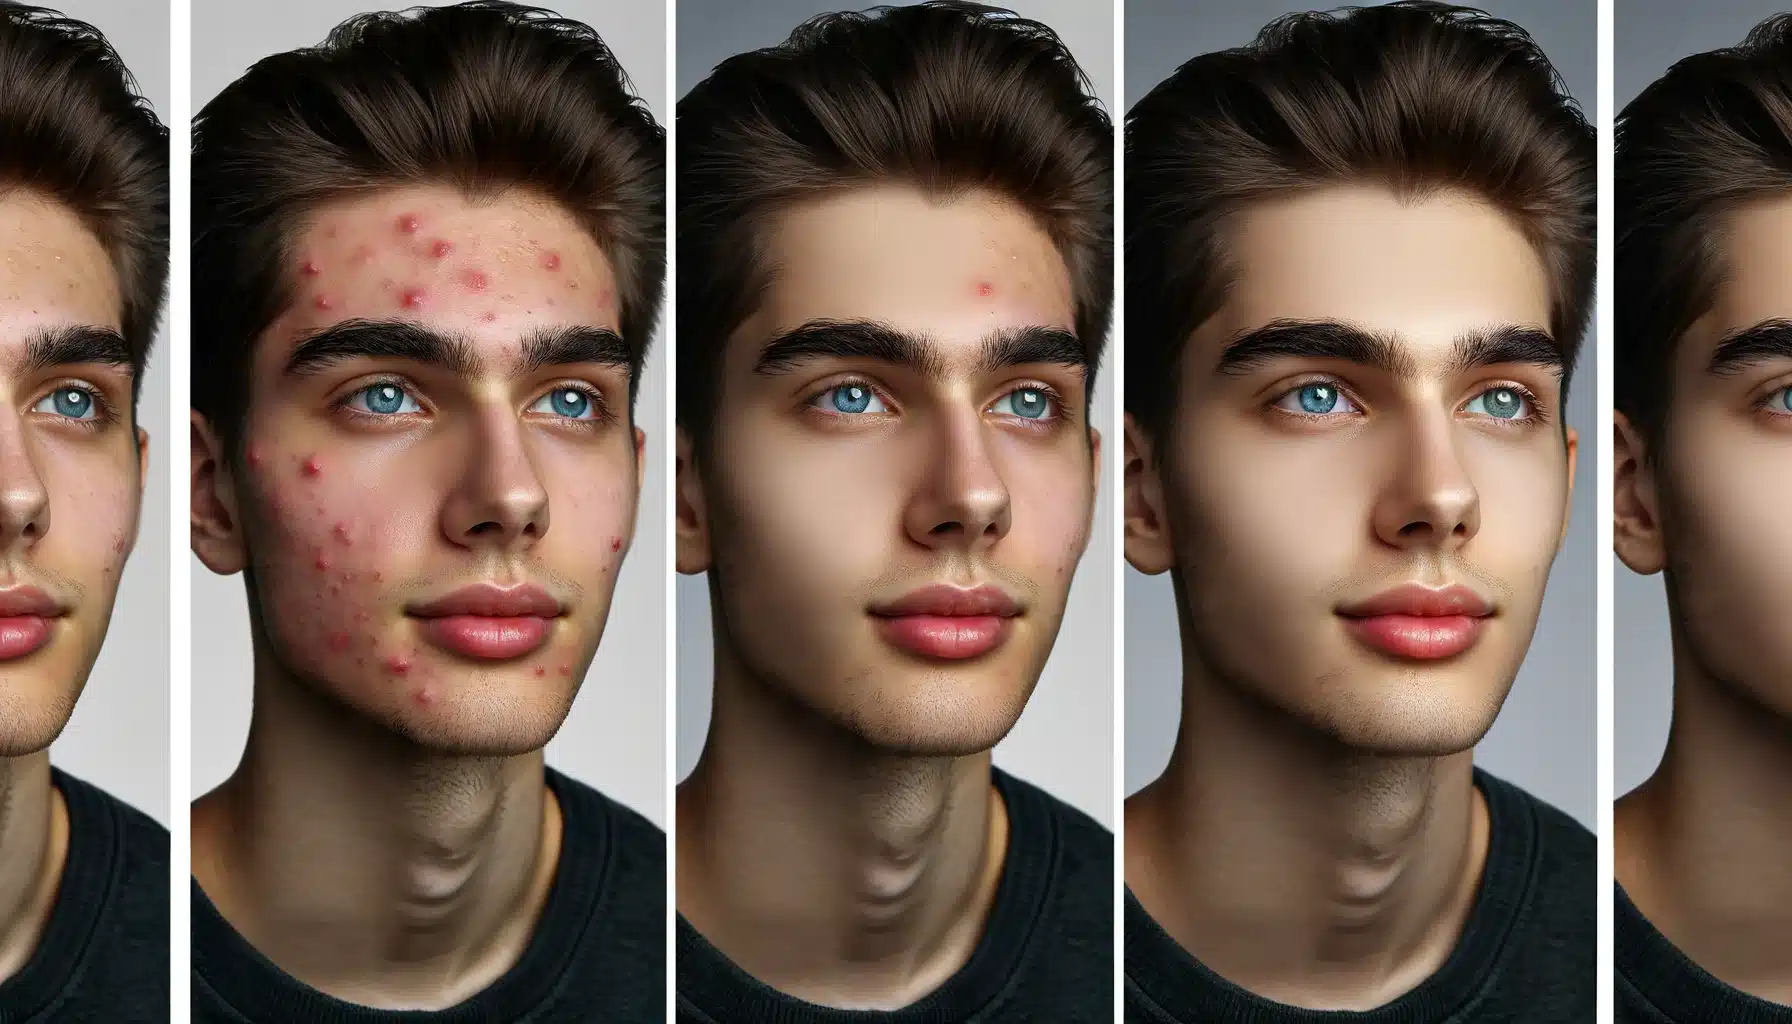 Before and after photoshop retouching tutorial on a young adult, showcasing a transition from acne and redness to clear, smooth skin.